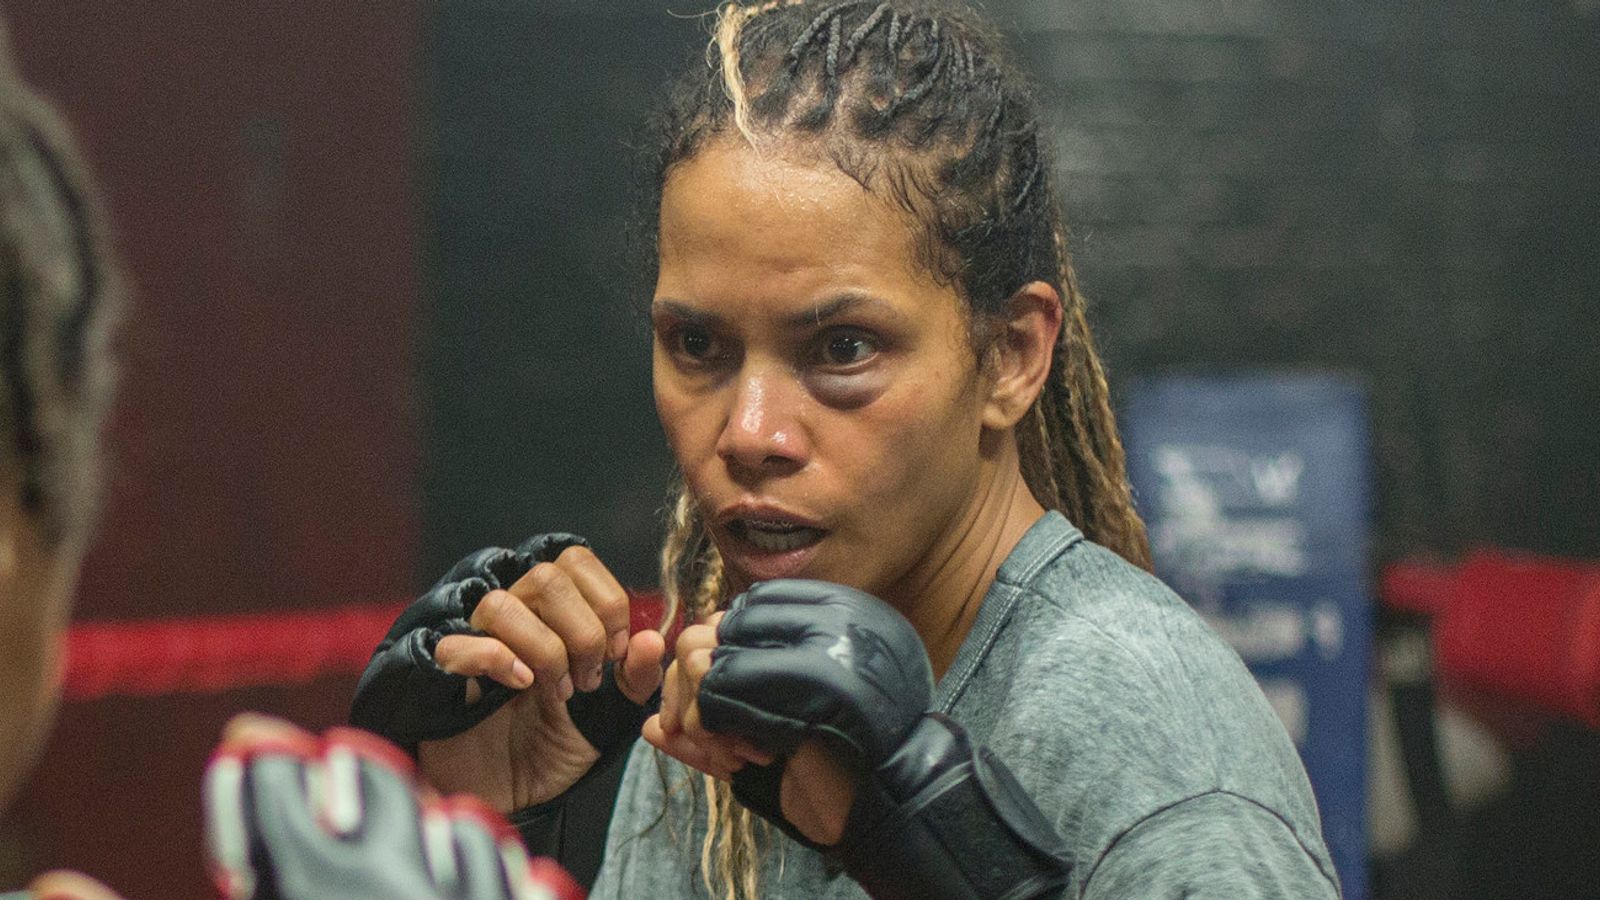 Jackie Justice True Story: She Is Not A Real MMA Fighter But A Creation Of Halle Berry   